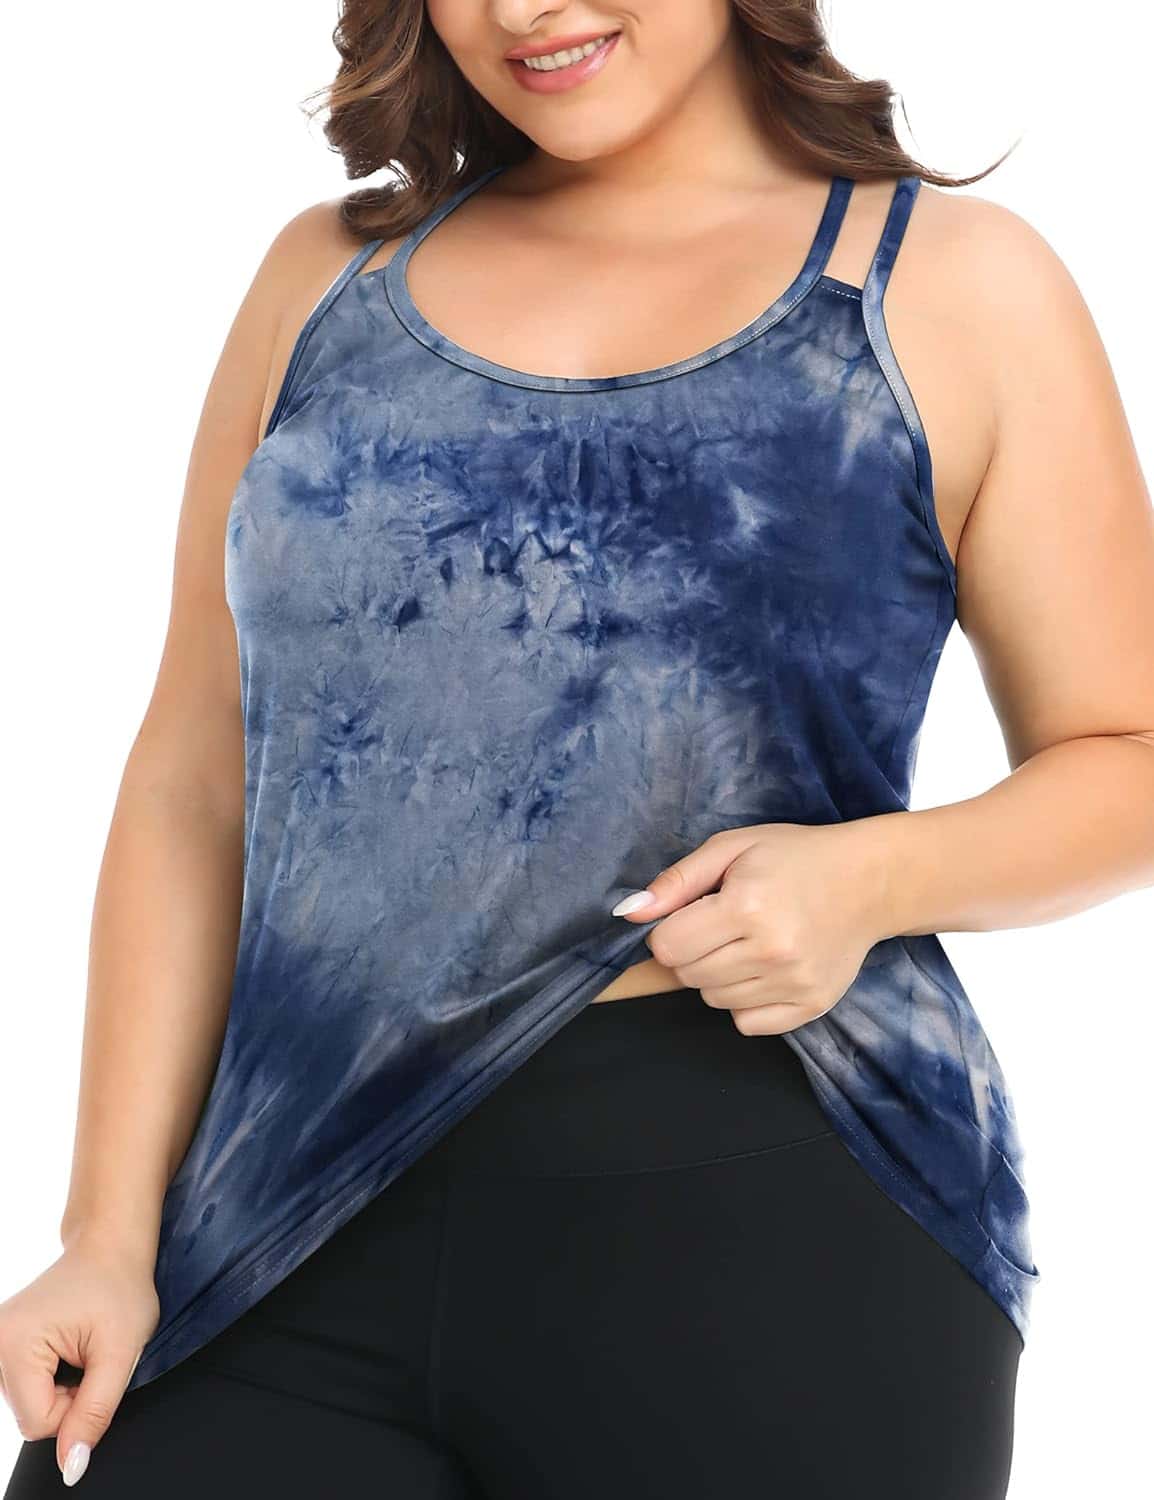 Foreyond Women’s Plus Size Workout Tank Tops: A Stylish and Comfortable Choice for Active Women